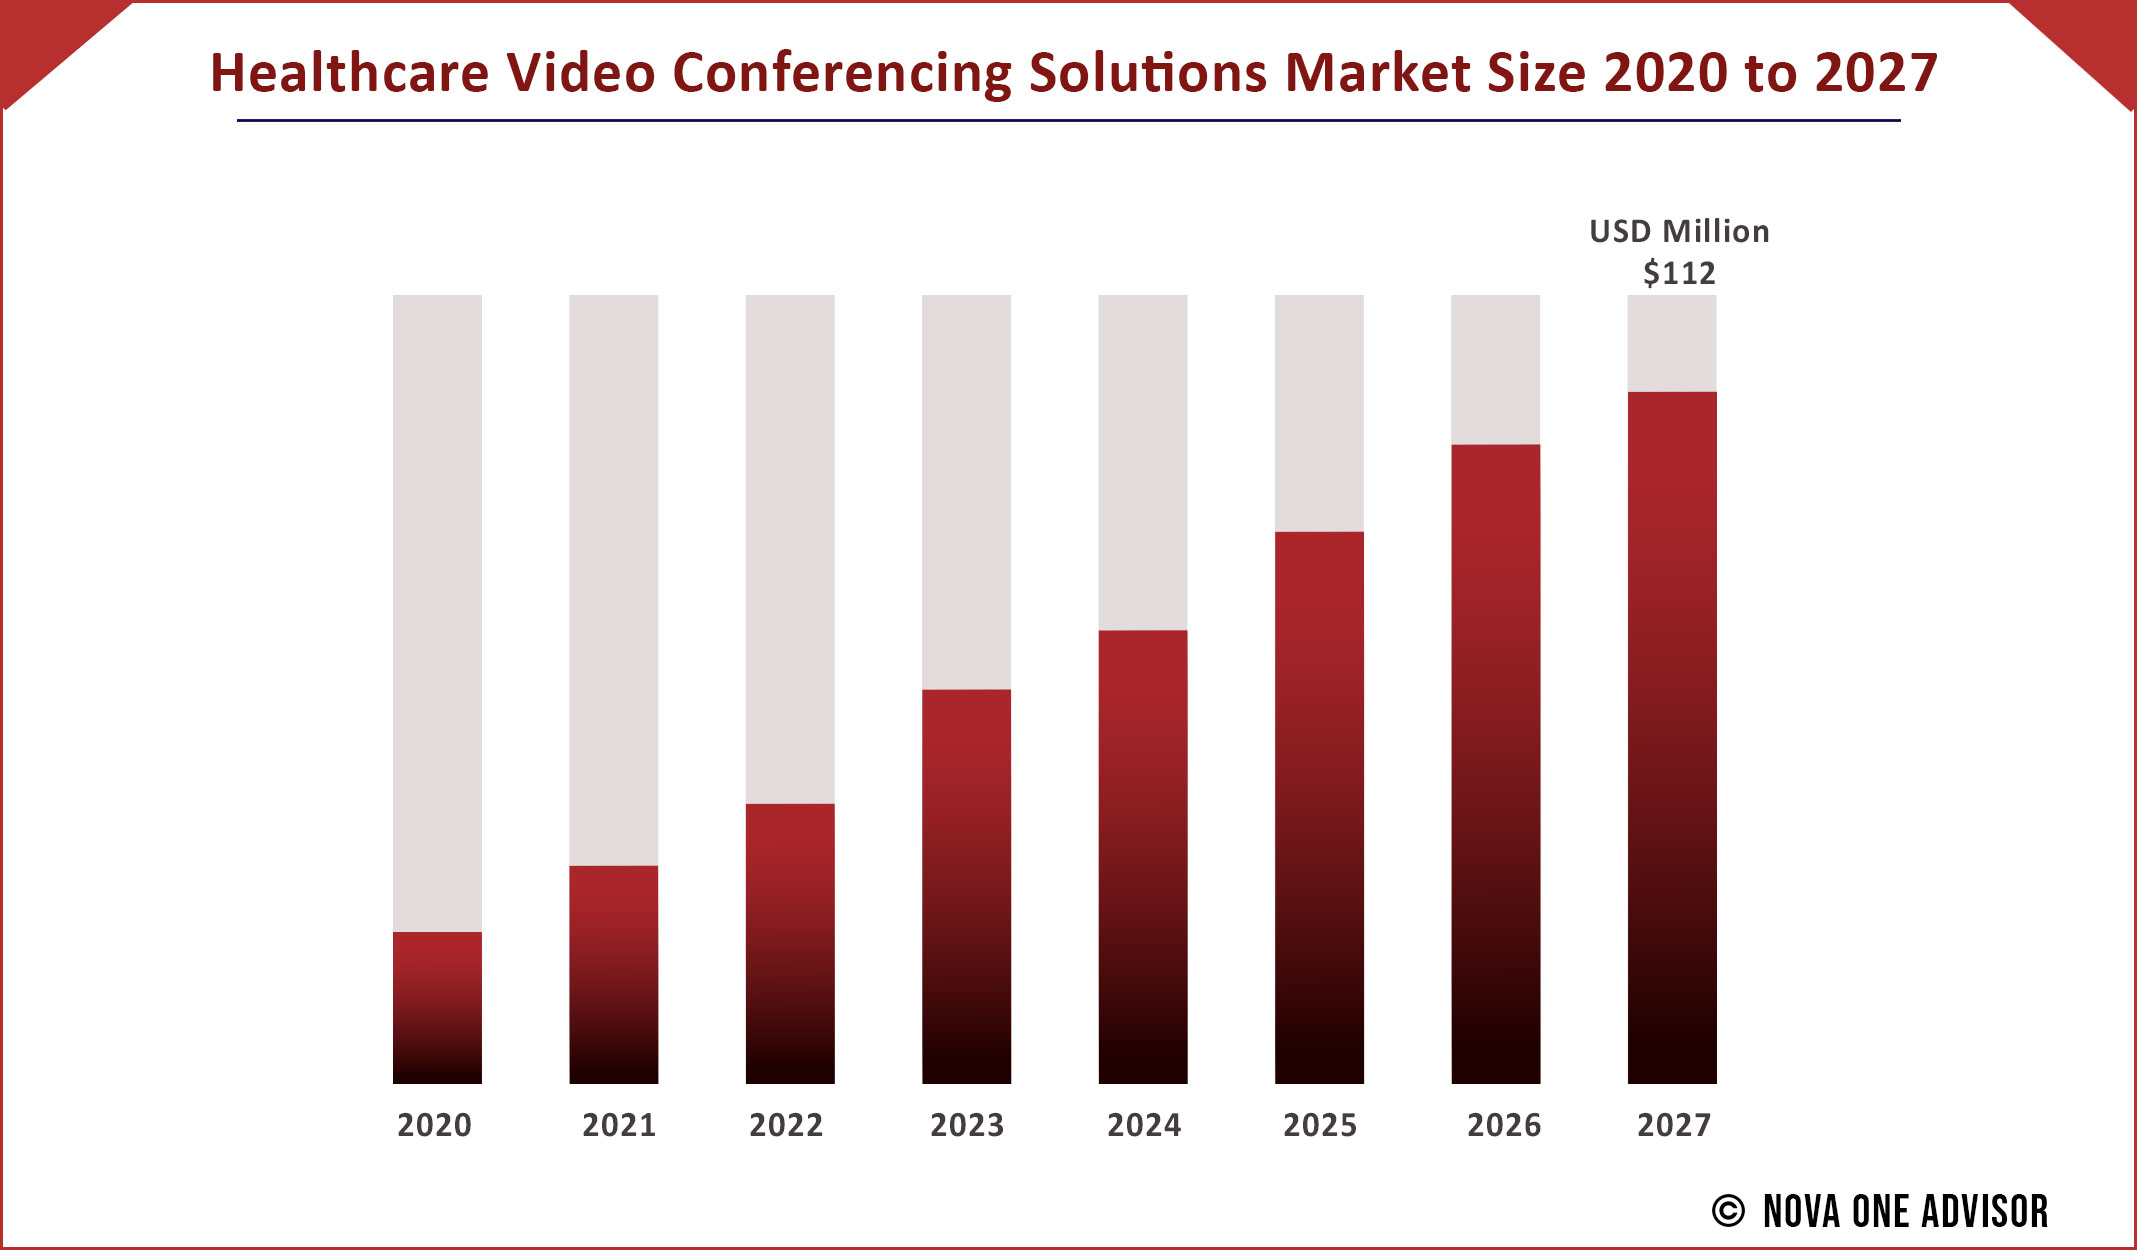 Healthcare Video Conferencing Solutions Market Size 2020 to 2027